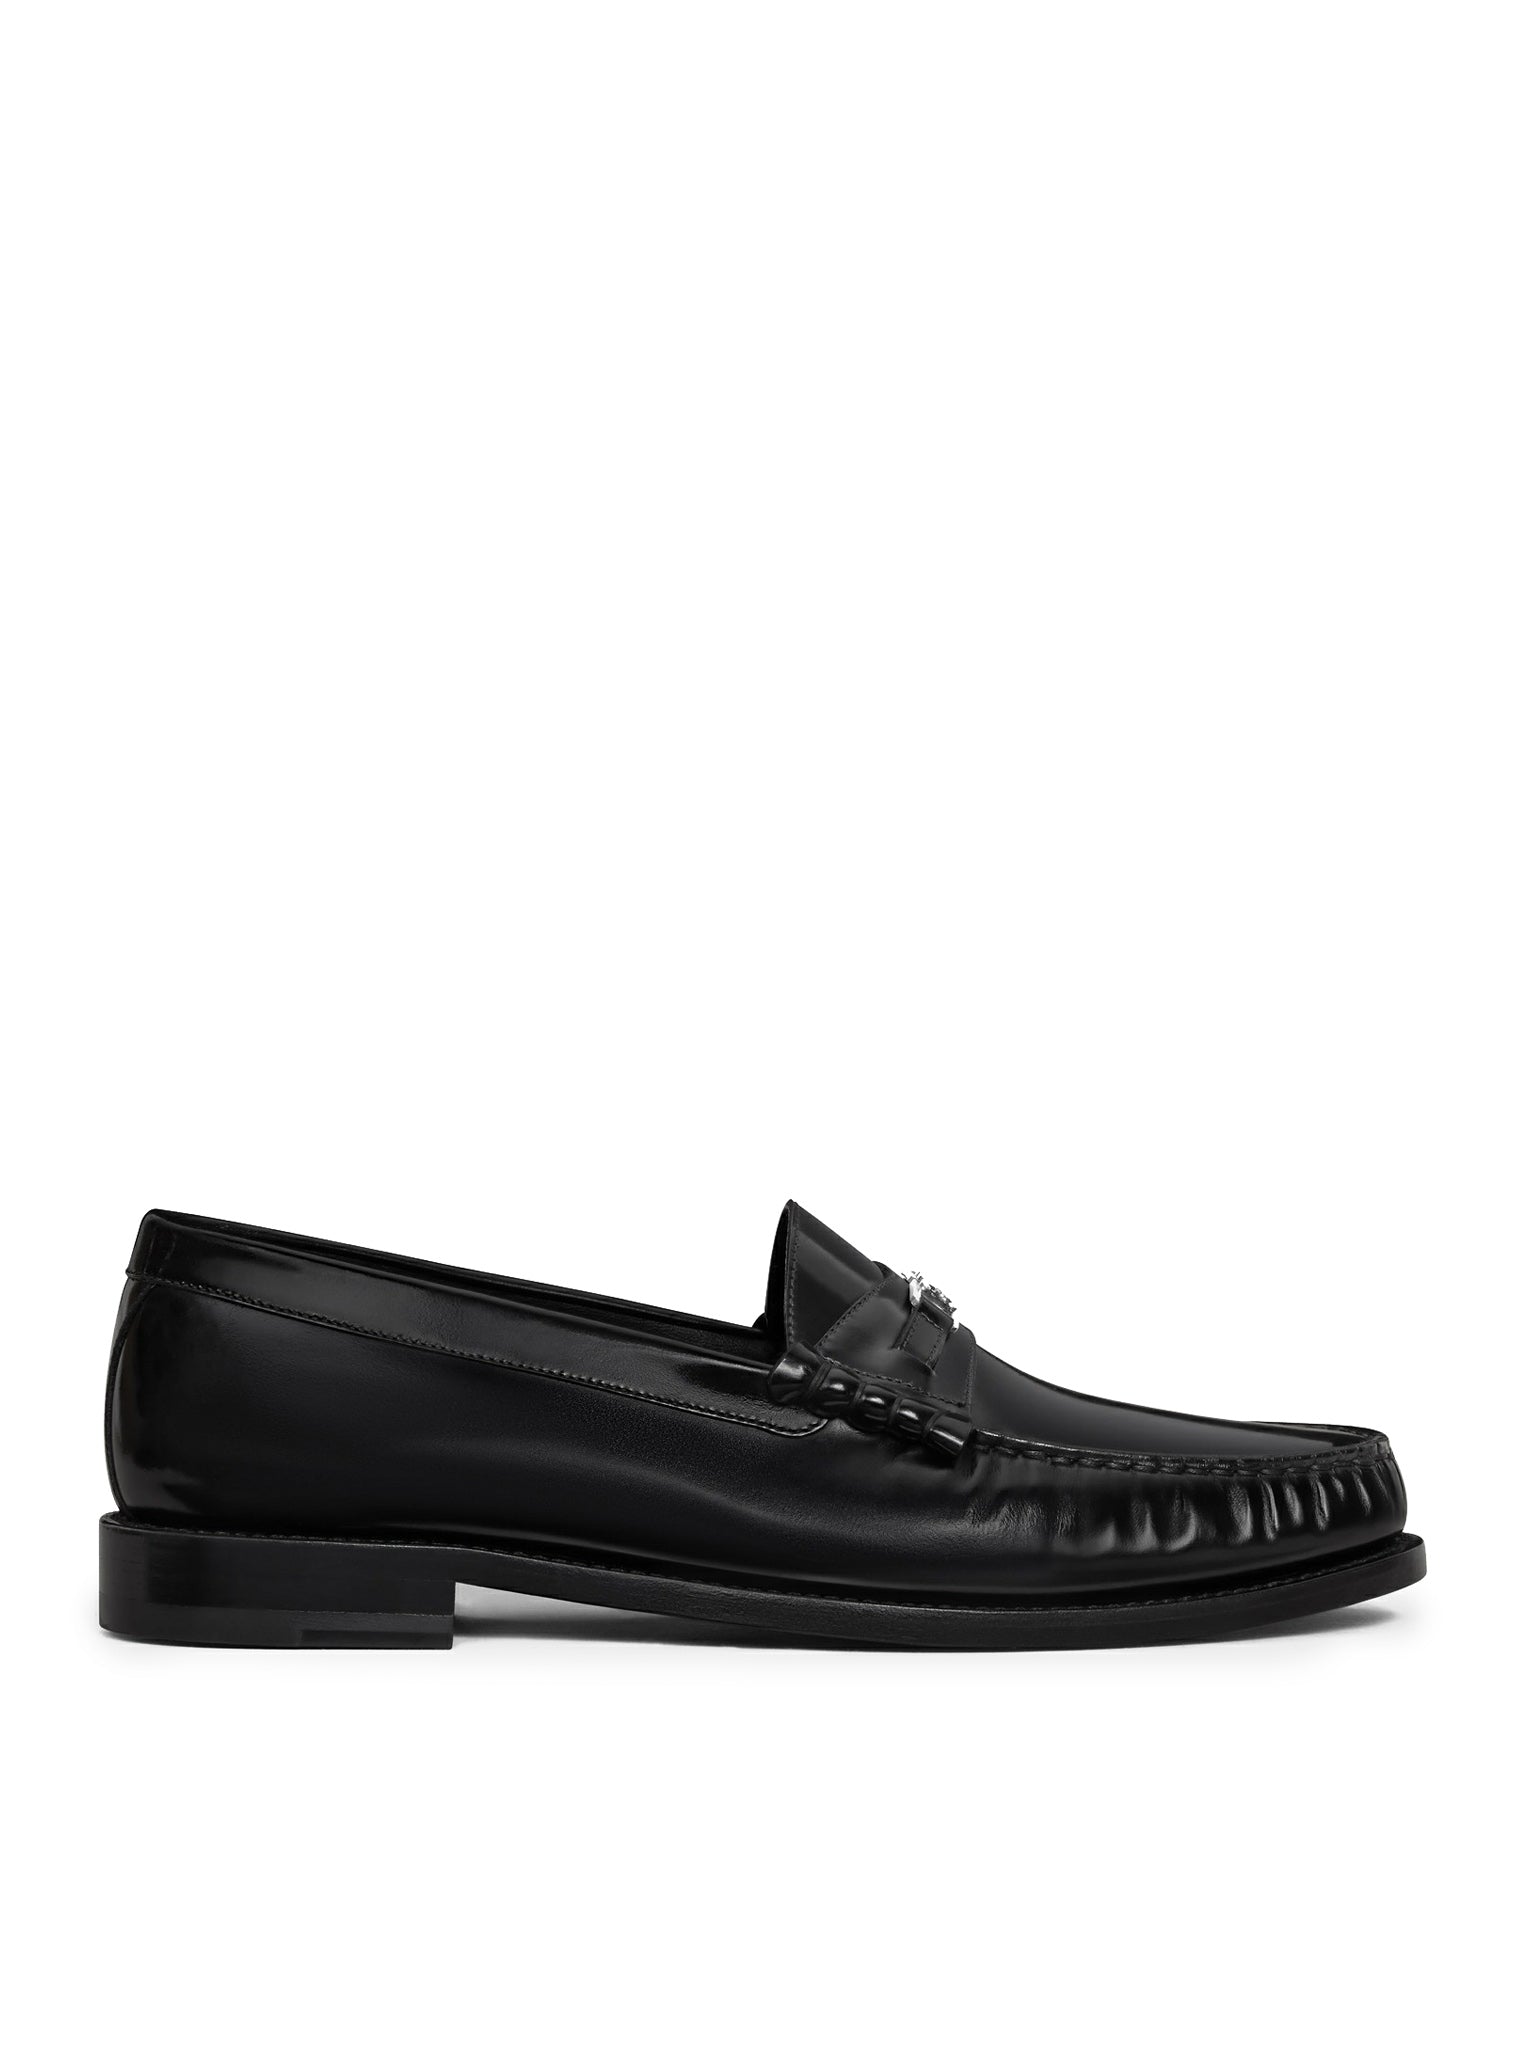 TRIOMPHE CELINE LUCO LOAFERS IN POLISHED BULLS LEATHER